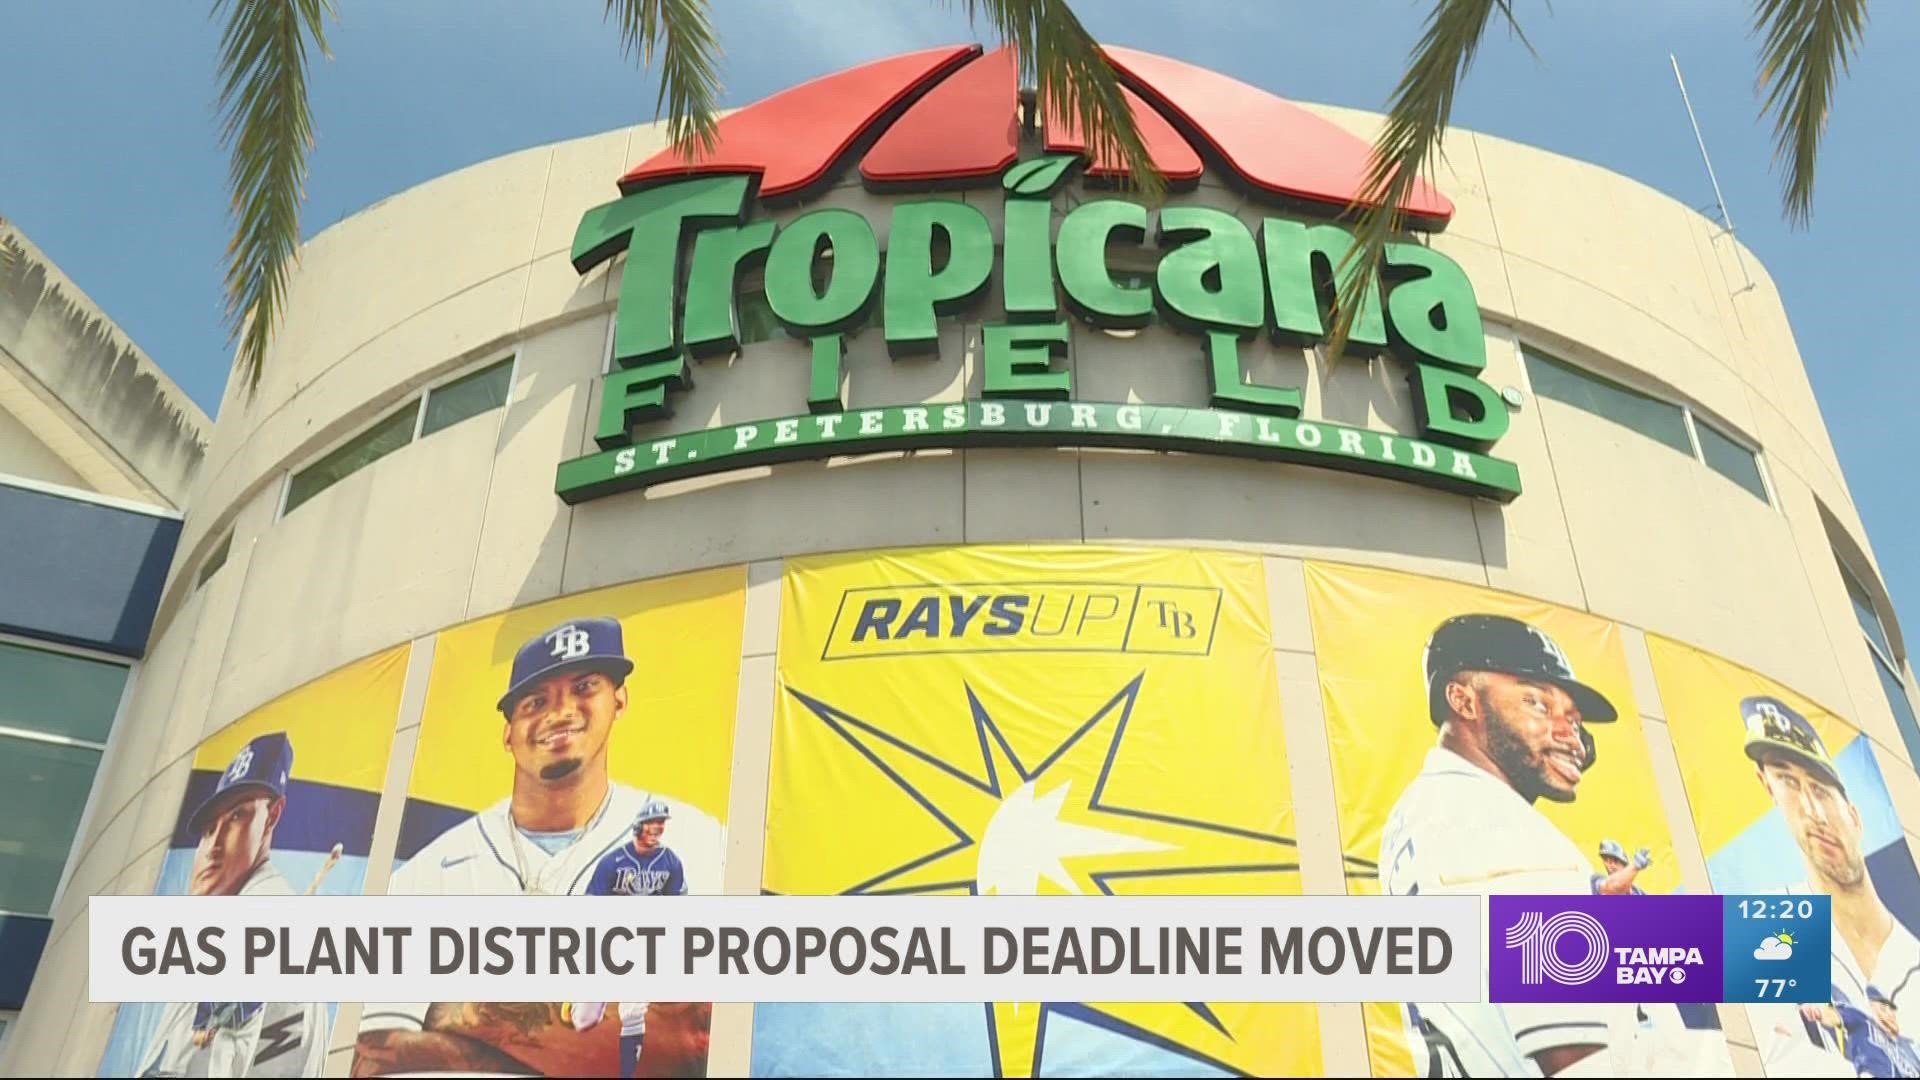 Developers now have until Dec. 2 to submit a plan for the site where Tropicana Field currently sits.